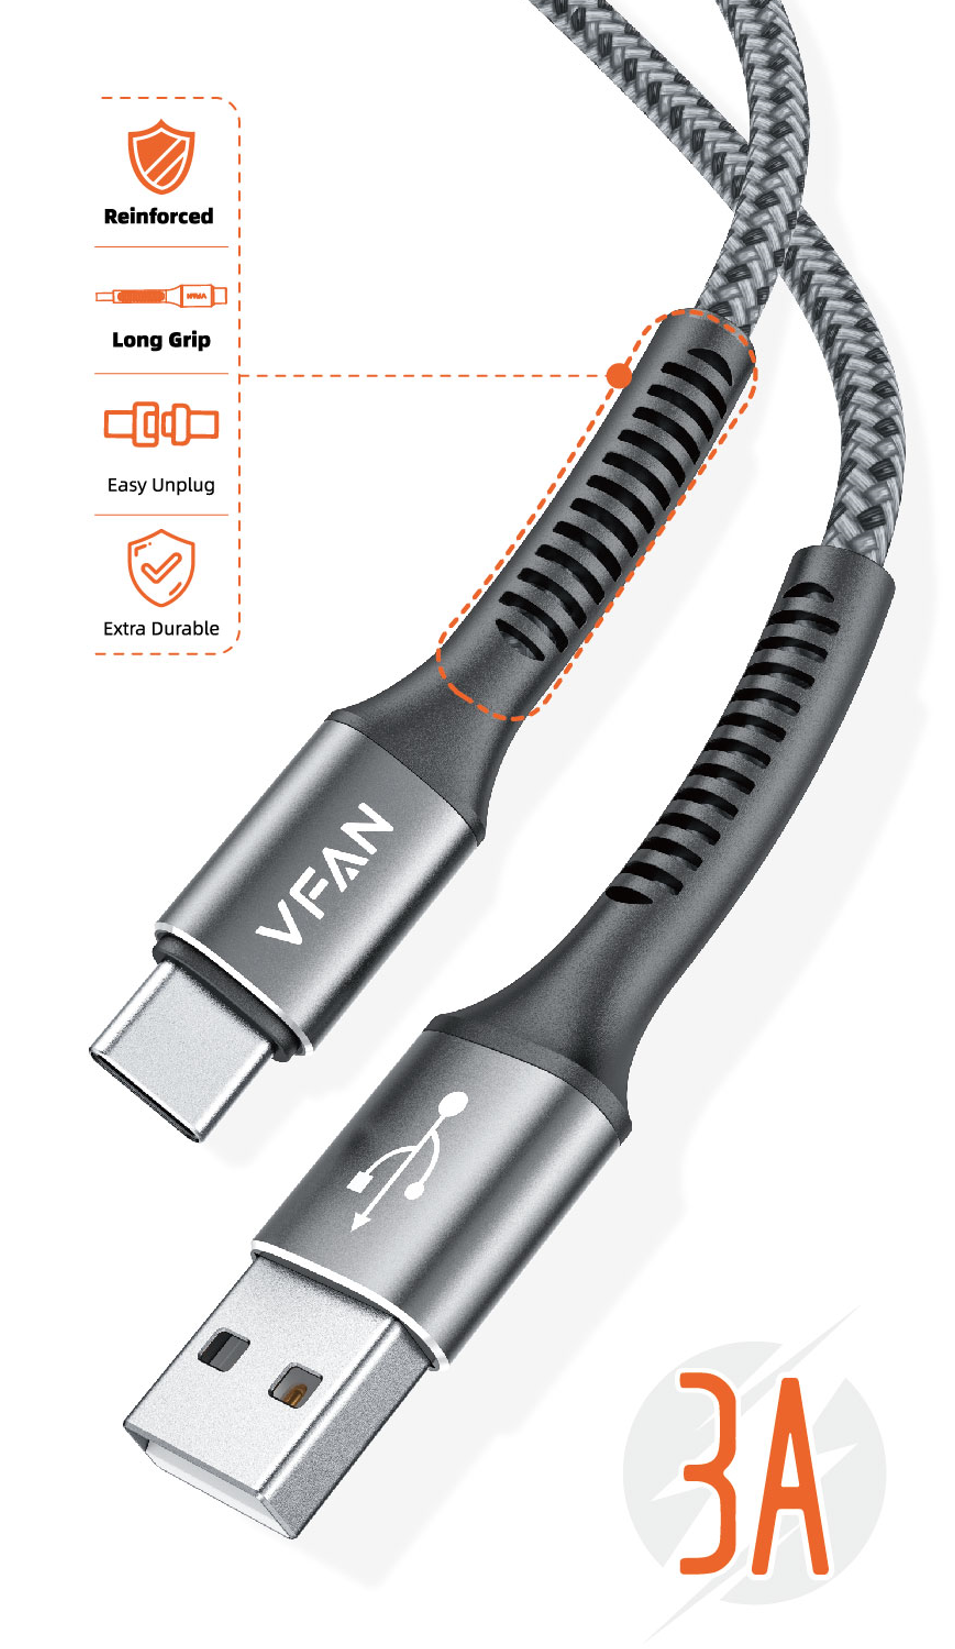 Super Fast Charging Cable with Reinforced Long Grip (X22) - 60W Type C to Type C (2 Meter) - SuperHub